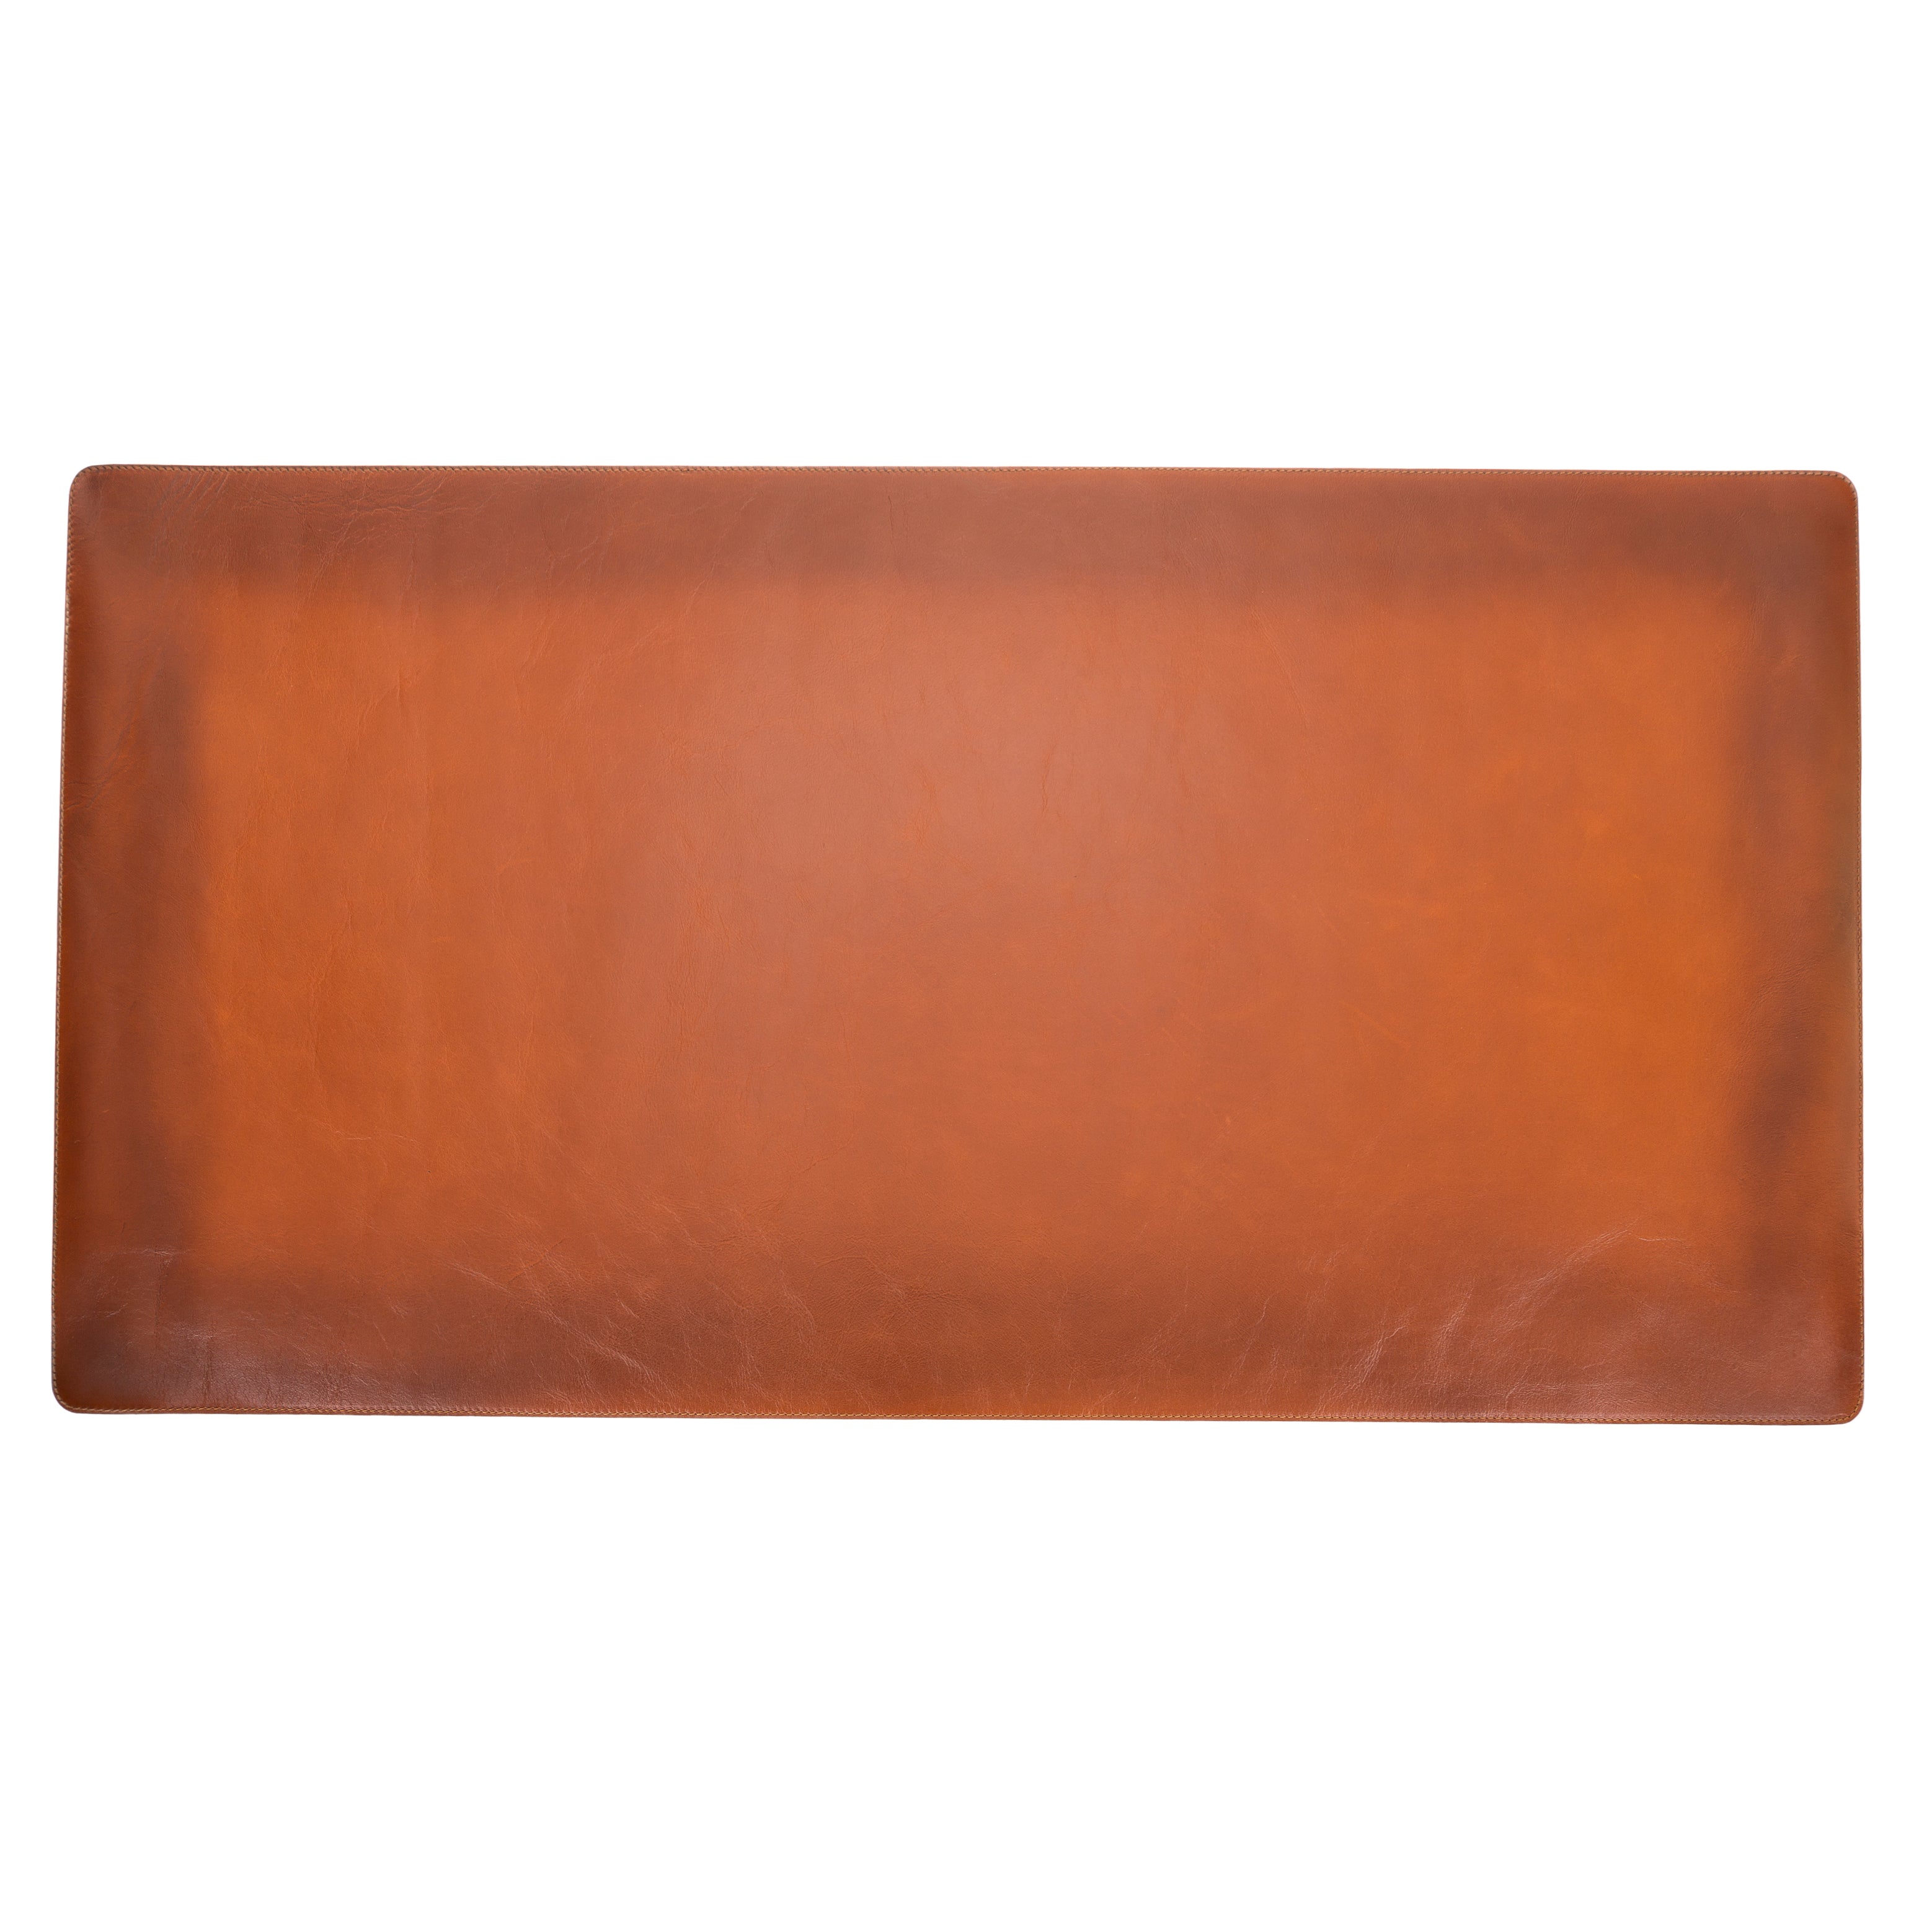 LupinnyLeather Genuine Leather Deskmat, Computer Pad, Office Desk Pad (Brown) 7